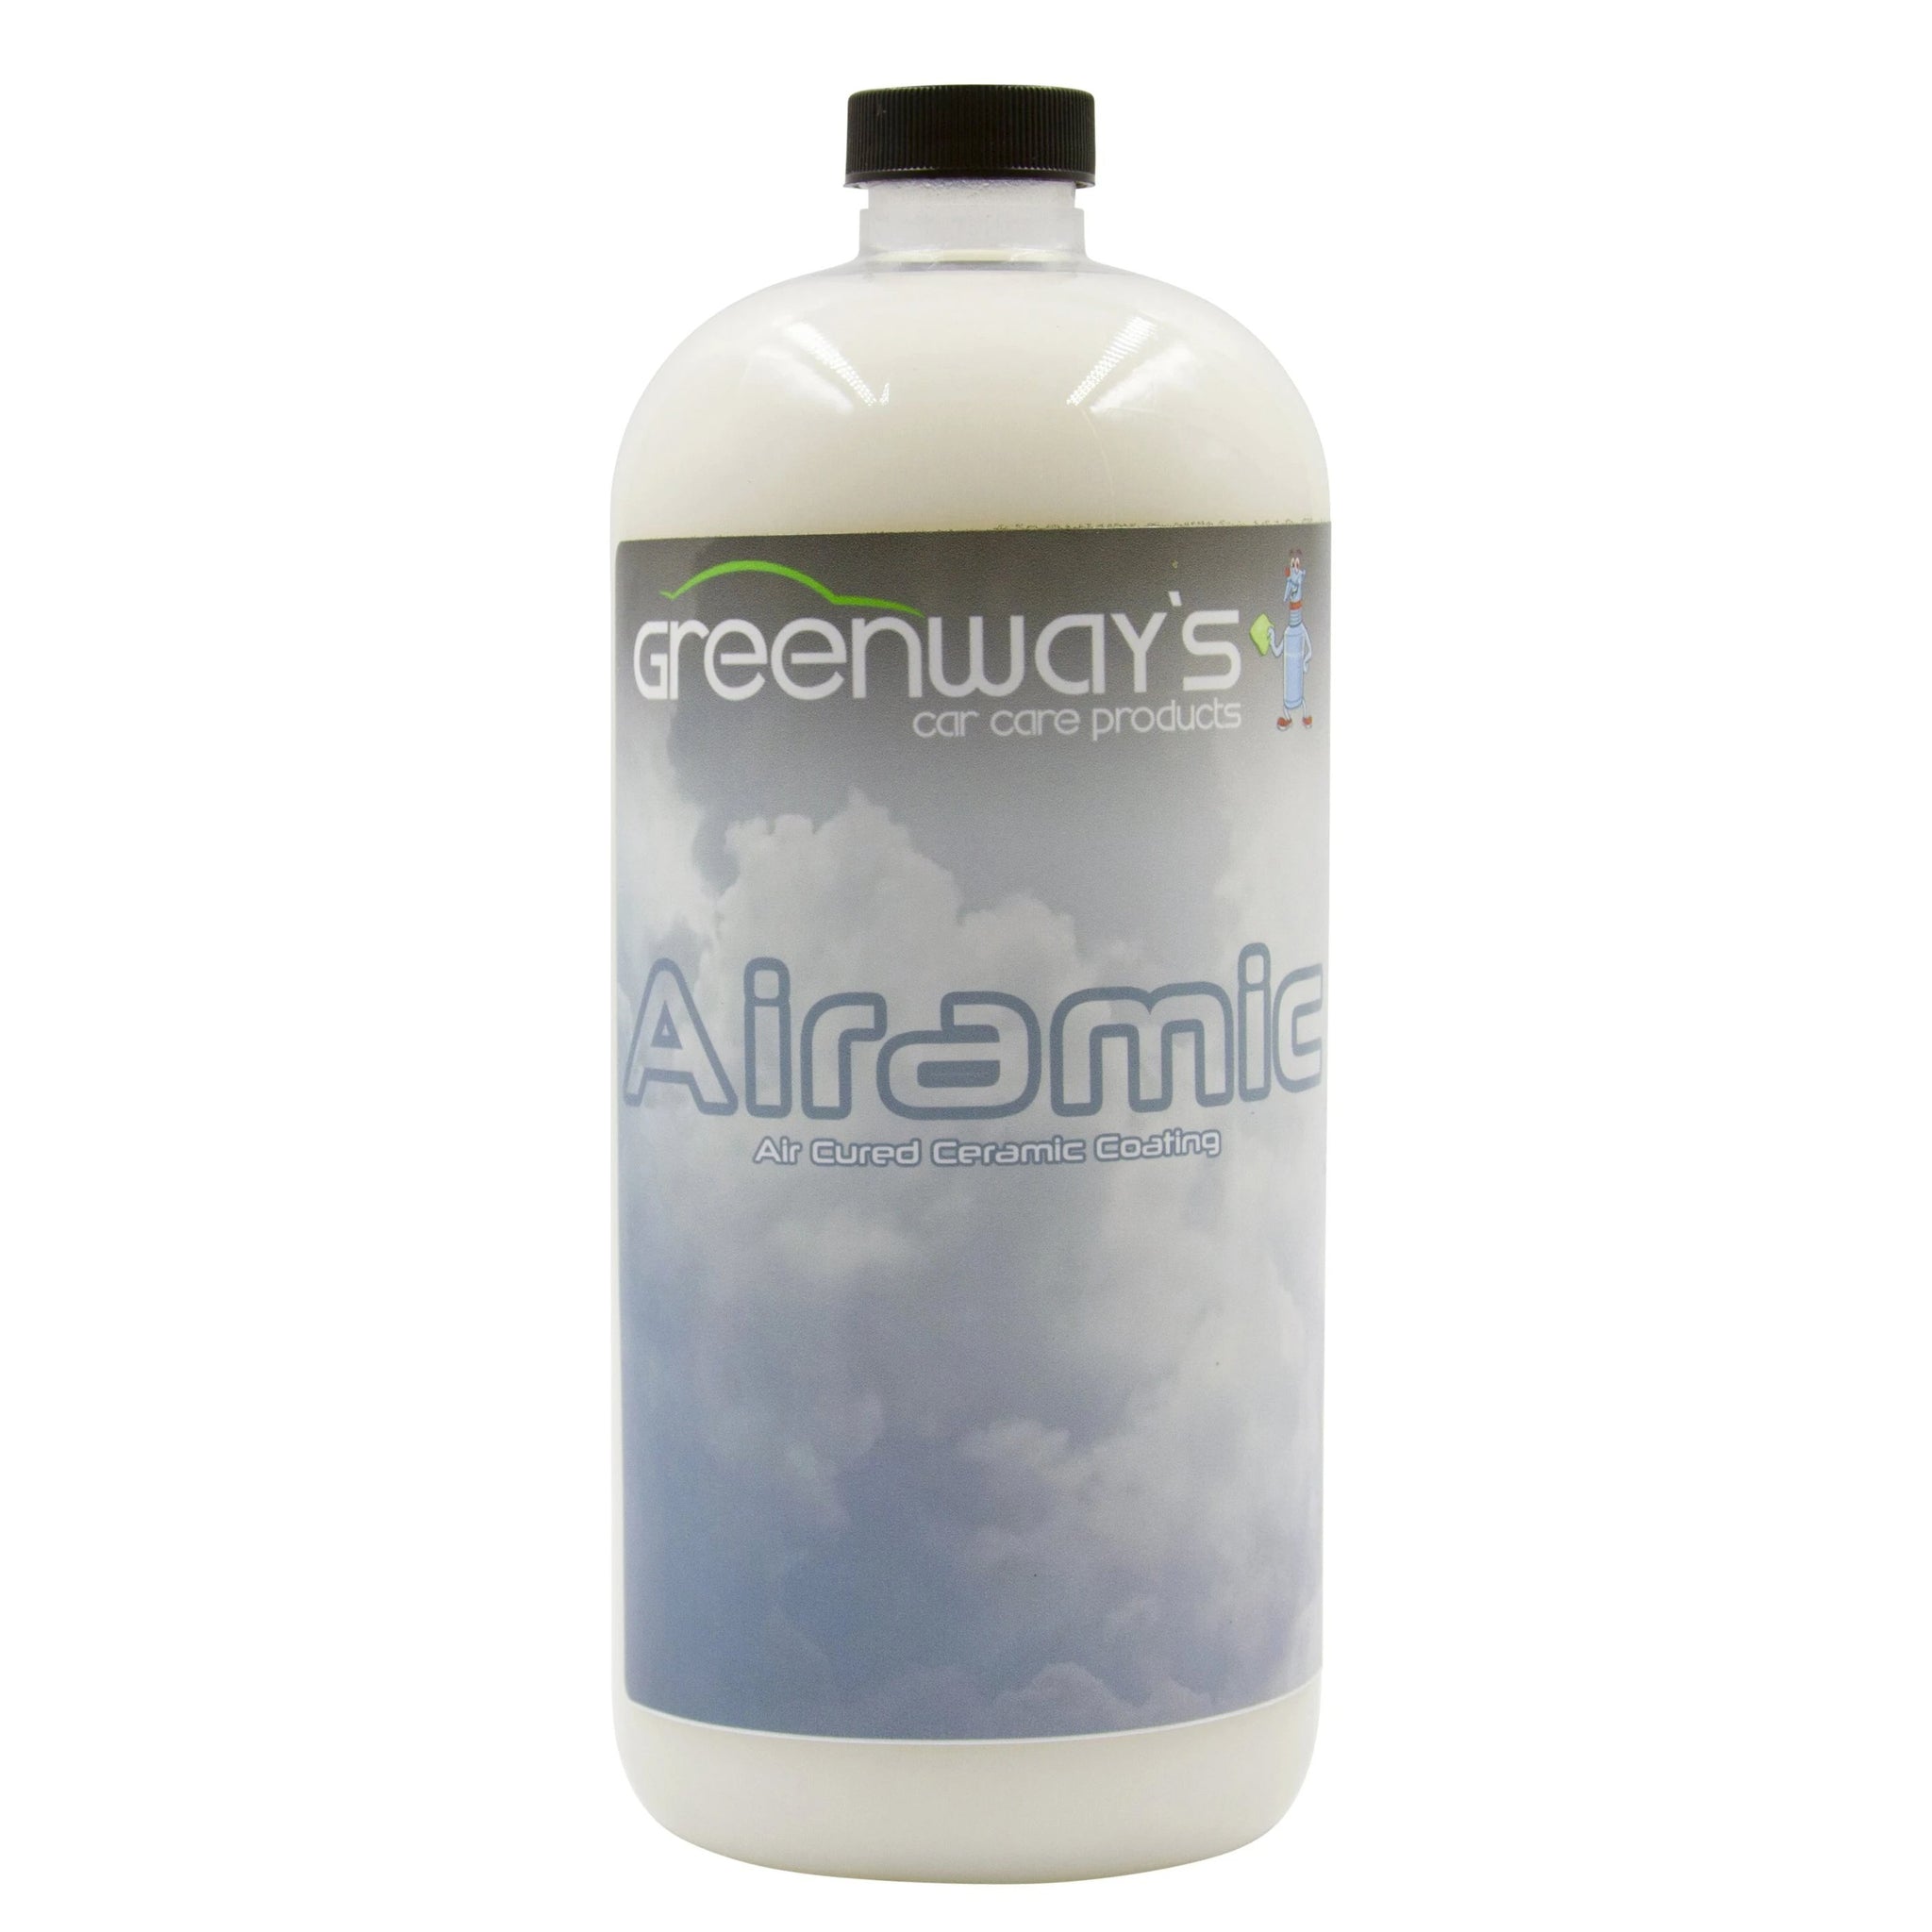 Greenway’s Airamic, air curing ceramic coating spray sealant for paint, glass, plastic, rubber, 2 year duration, 32 ounces.